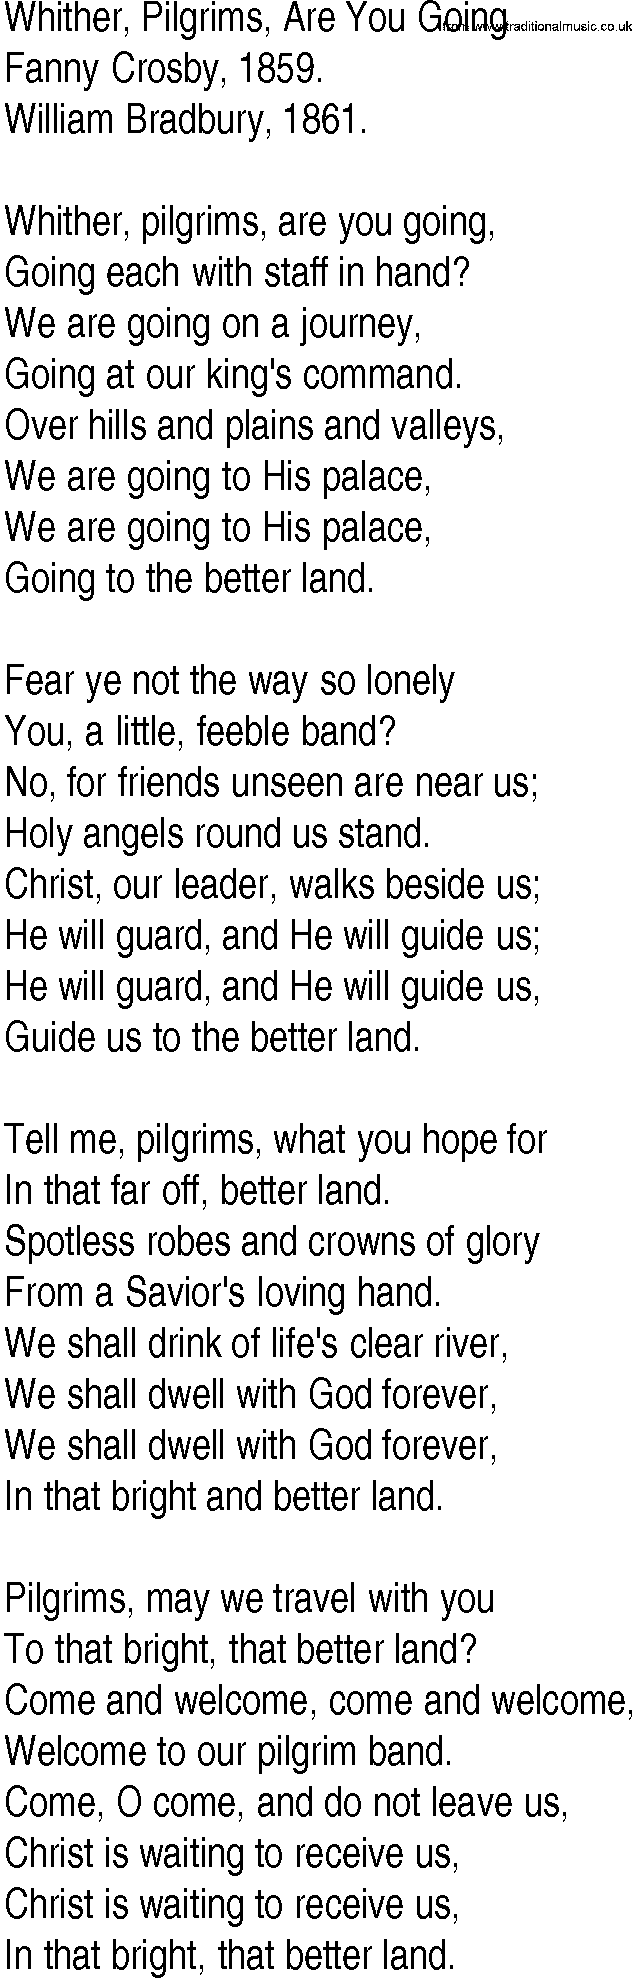 Hymn and Gospel Song: Whither, Pilgrims, Are You Going by Fanny Crosby lyrics